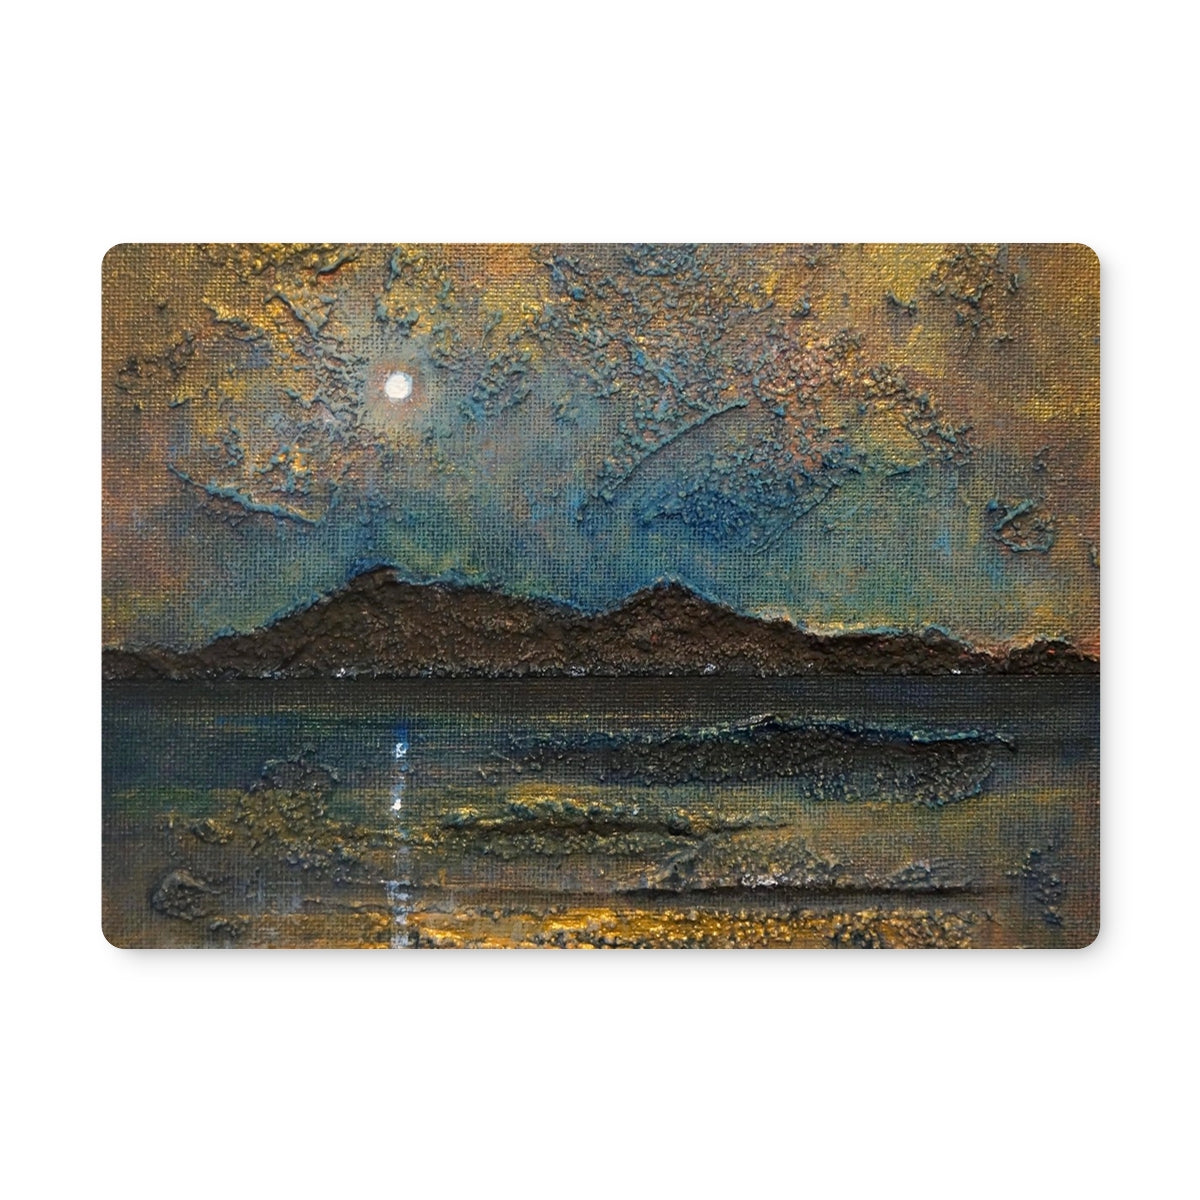 Arran Moonlight Art Gifts Placemat-Placemats-Arran Art Gallery-4 Placemats-Paintings, Prints, Homeware, Art Gifts From Scotland By Scottish Artist Kevin Hunter